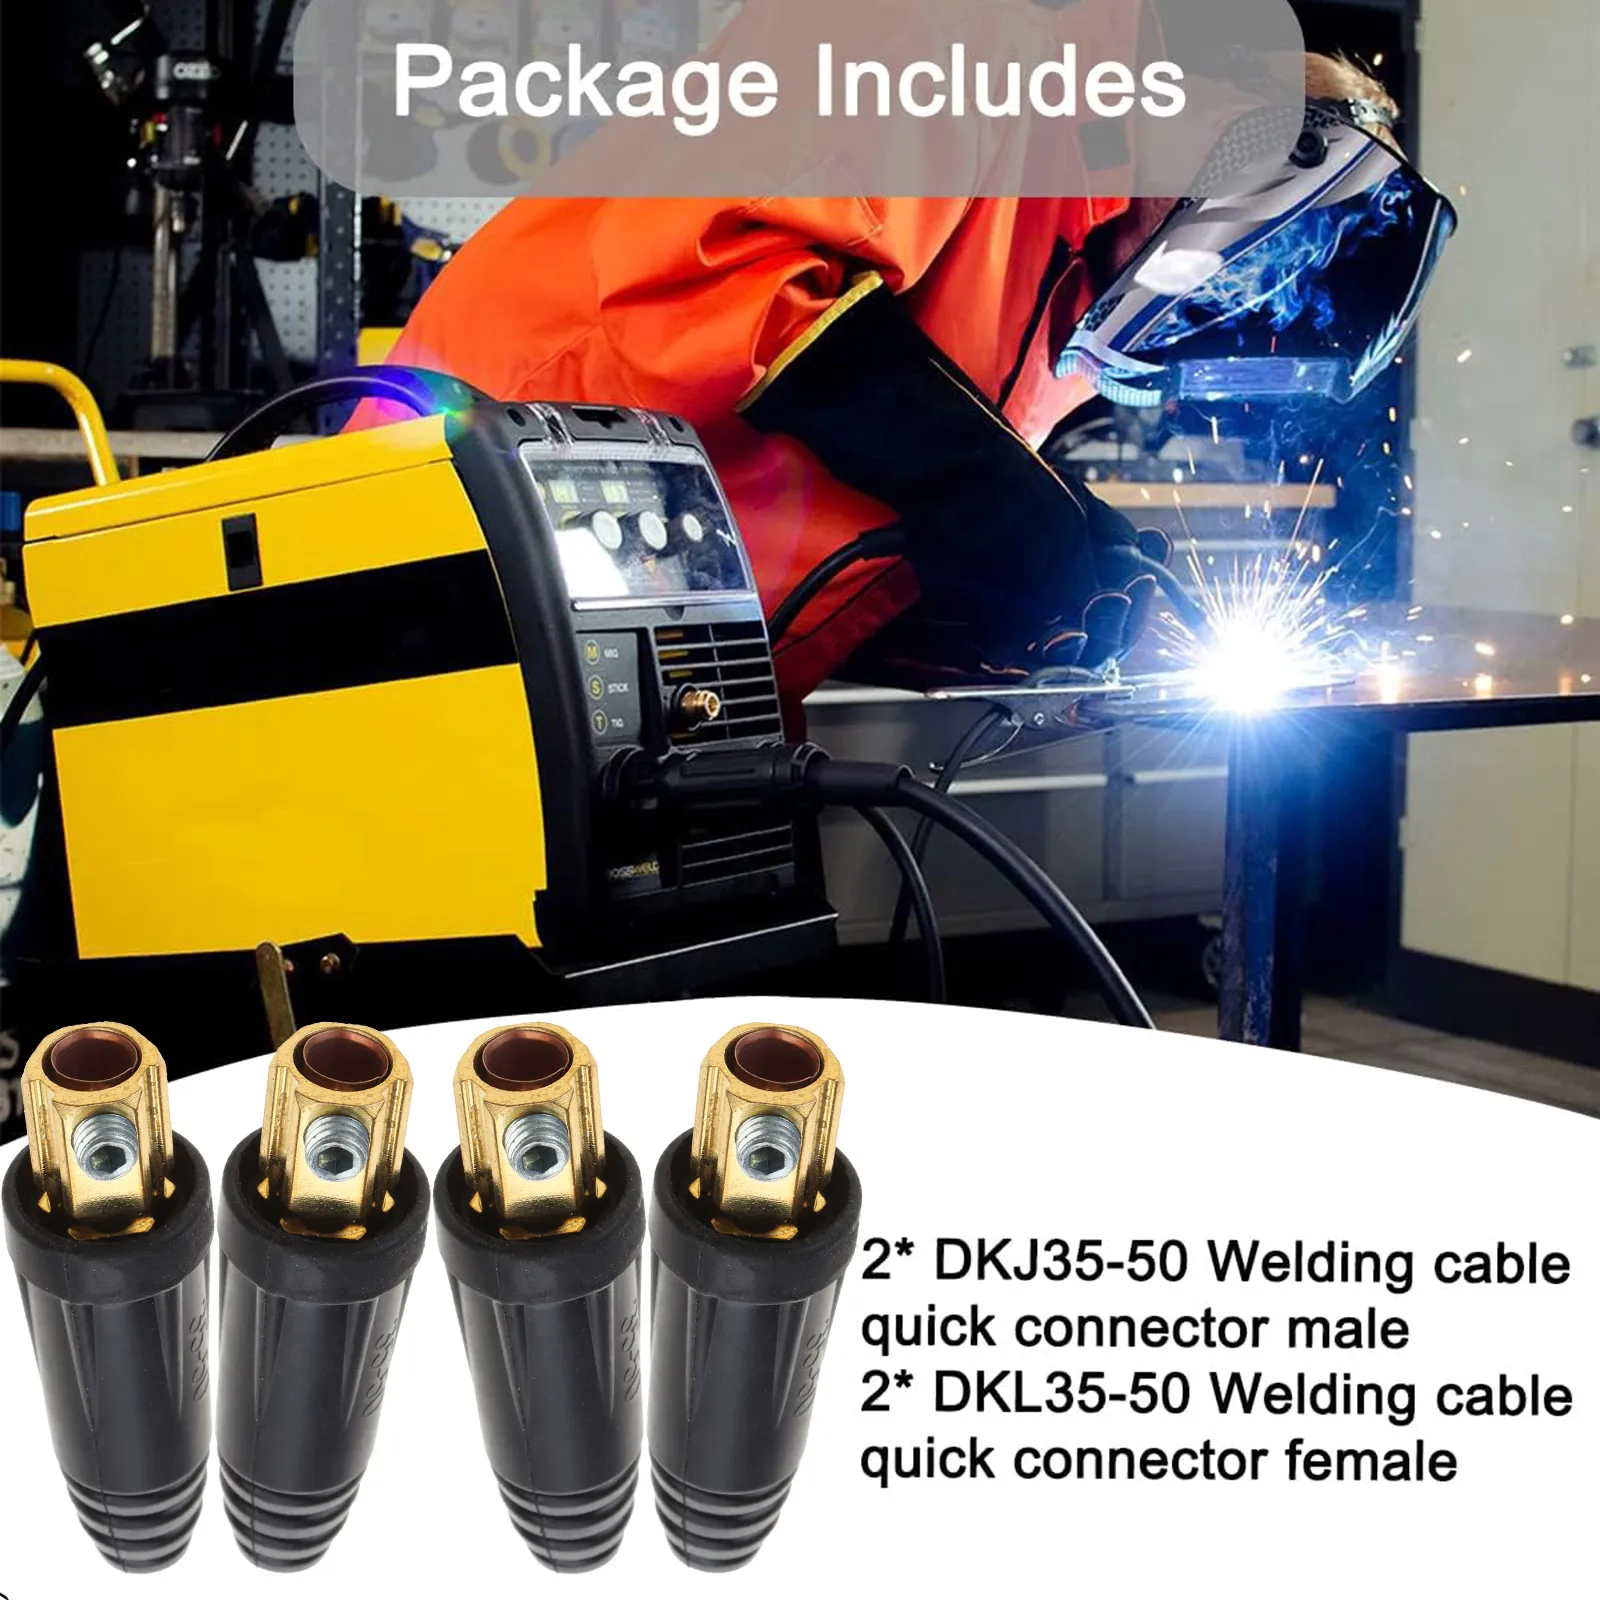 

2x Welding Cable Joint Quick Connector Pair 200Amp-300Amp DKJ35-50 85AC